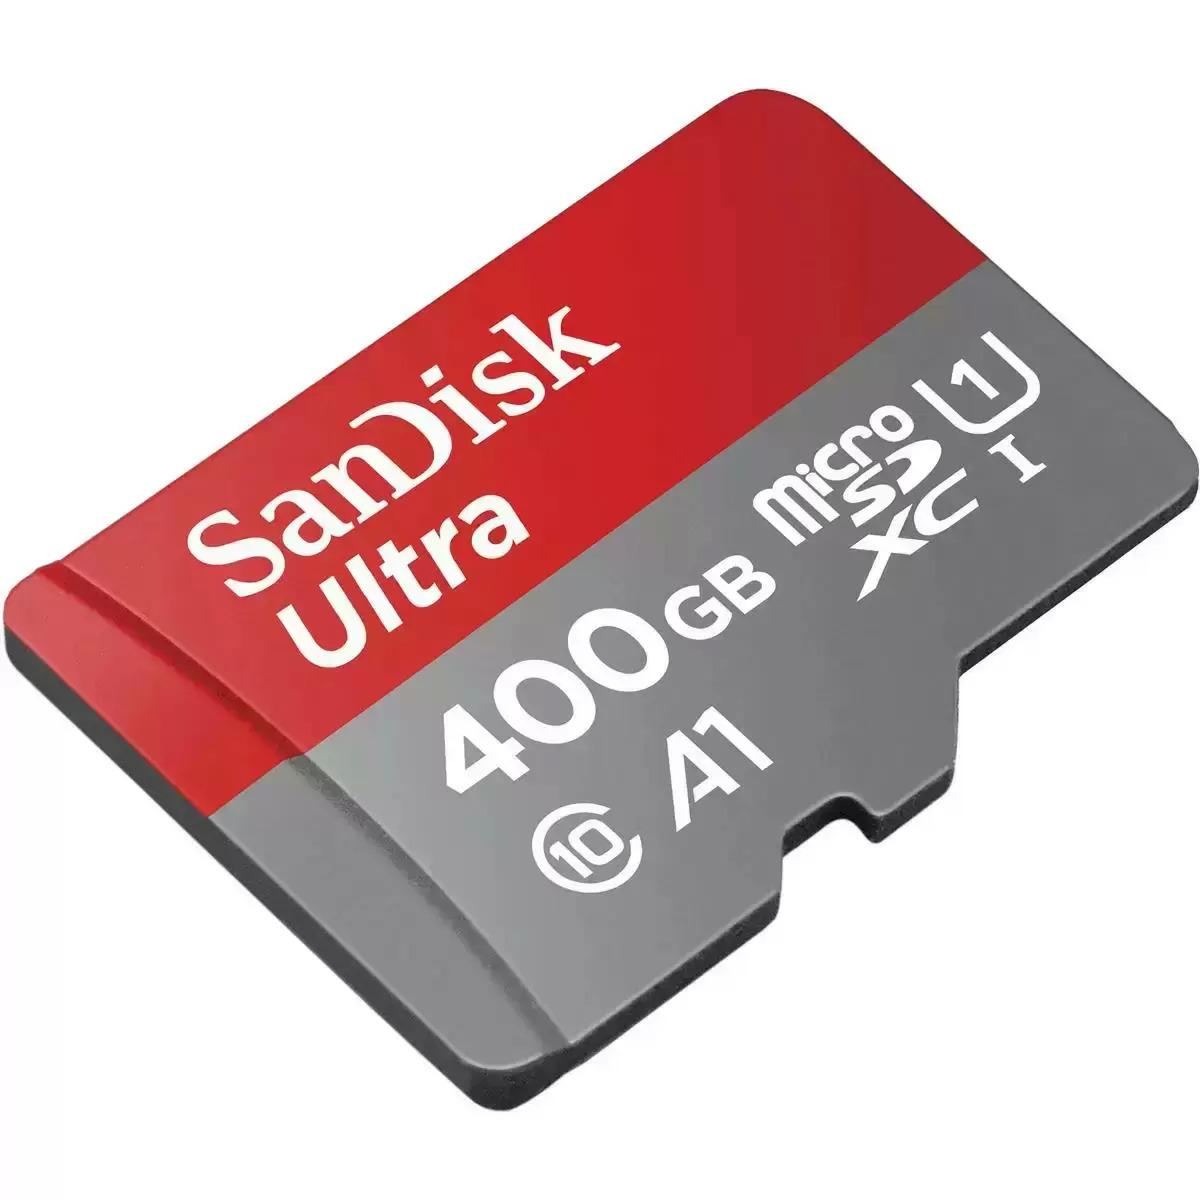 400GB SanDisk Ultra UHS-1 MicroSDXC Memory Card with Adapter for $35.99 Shipped